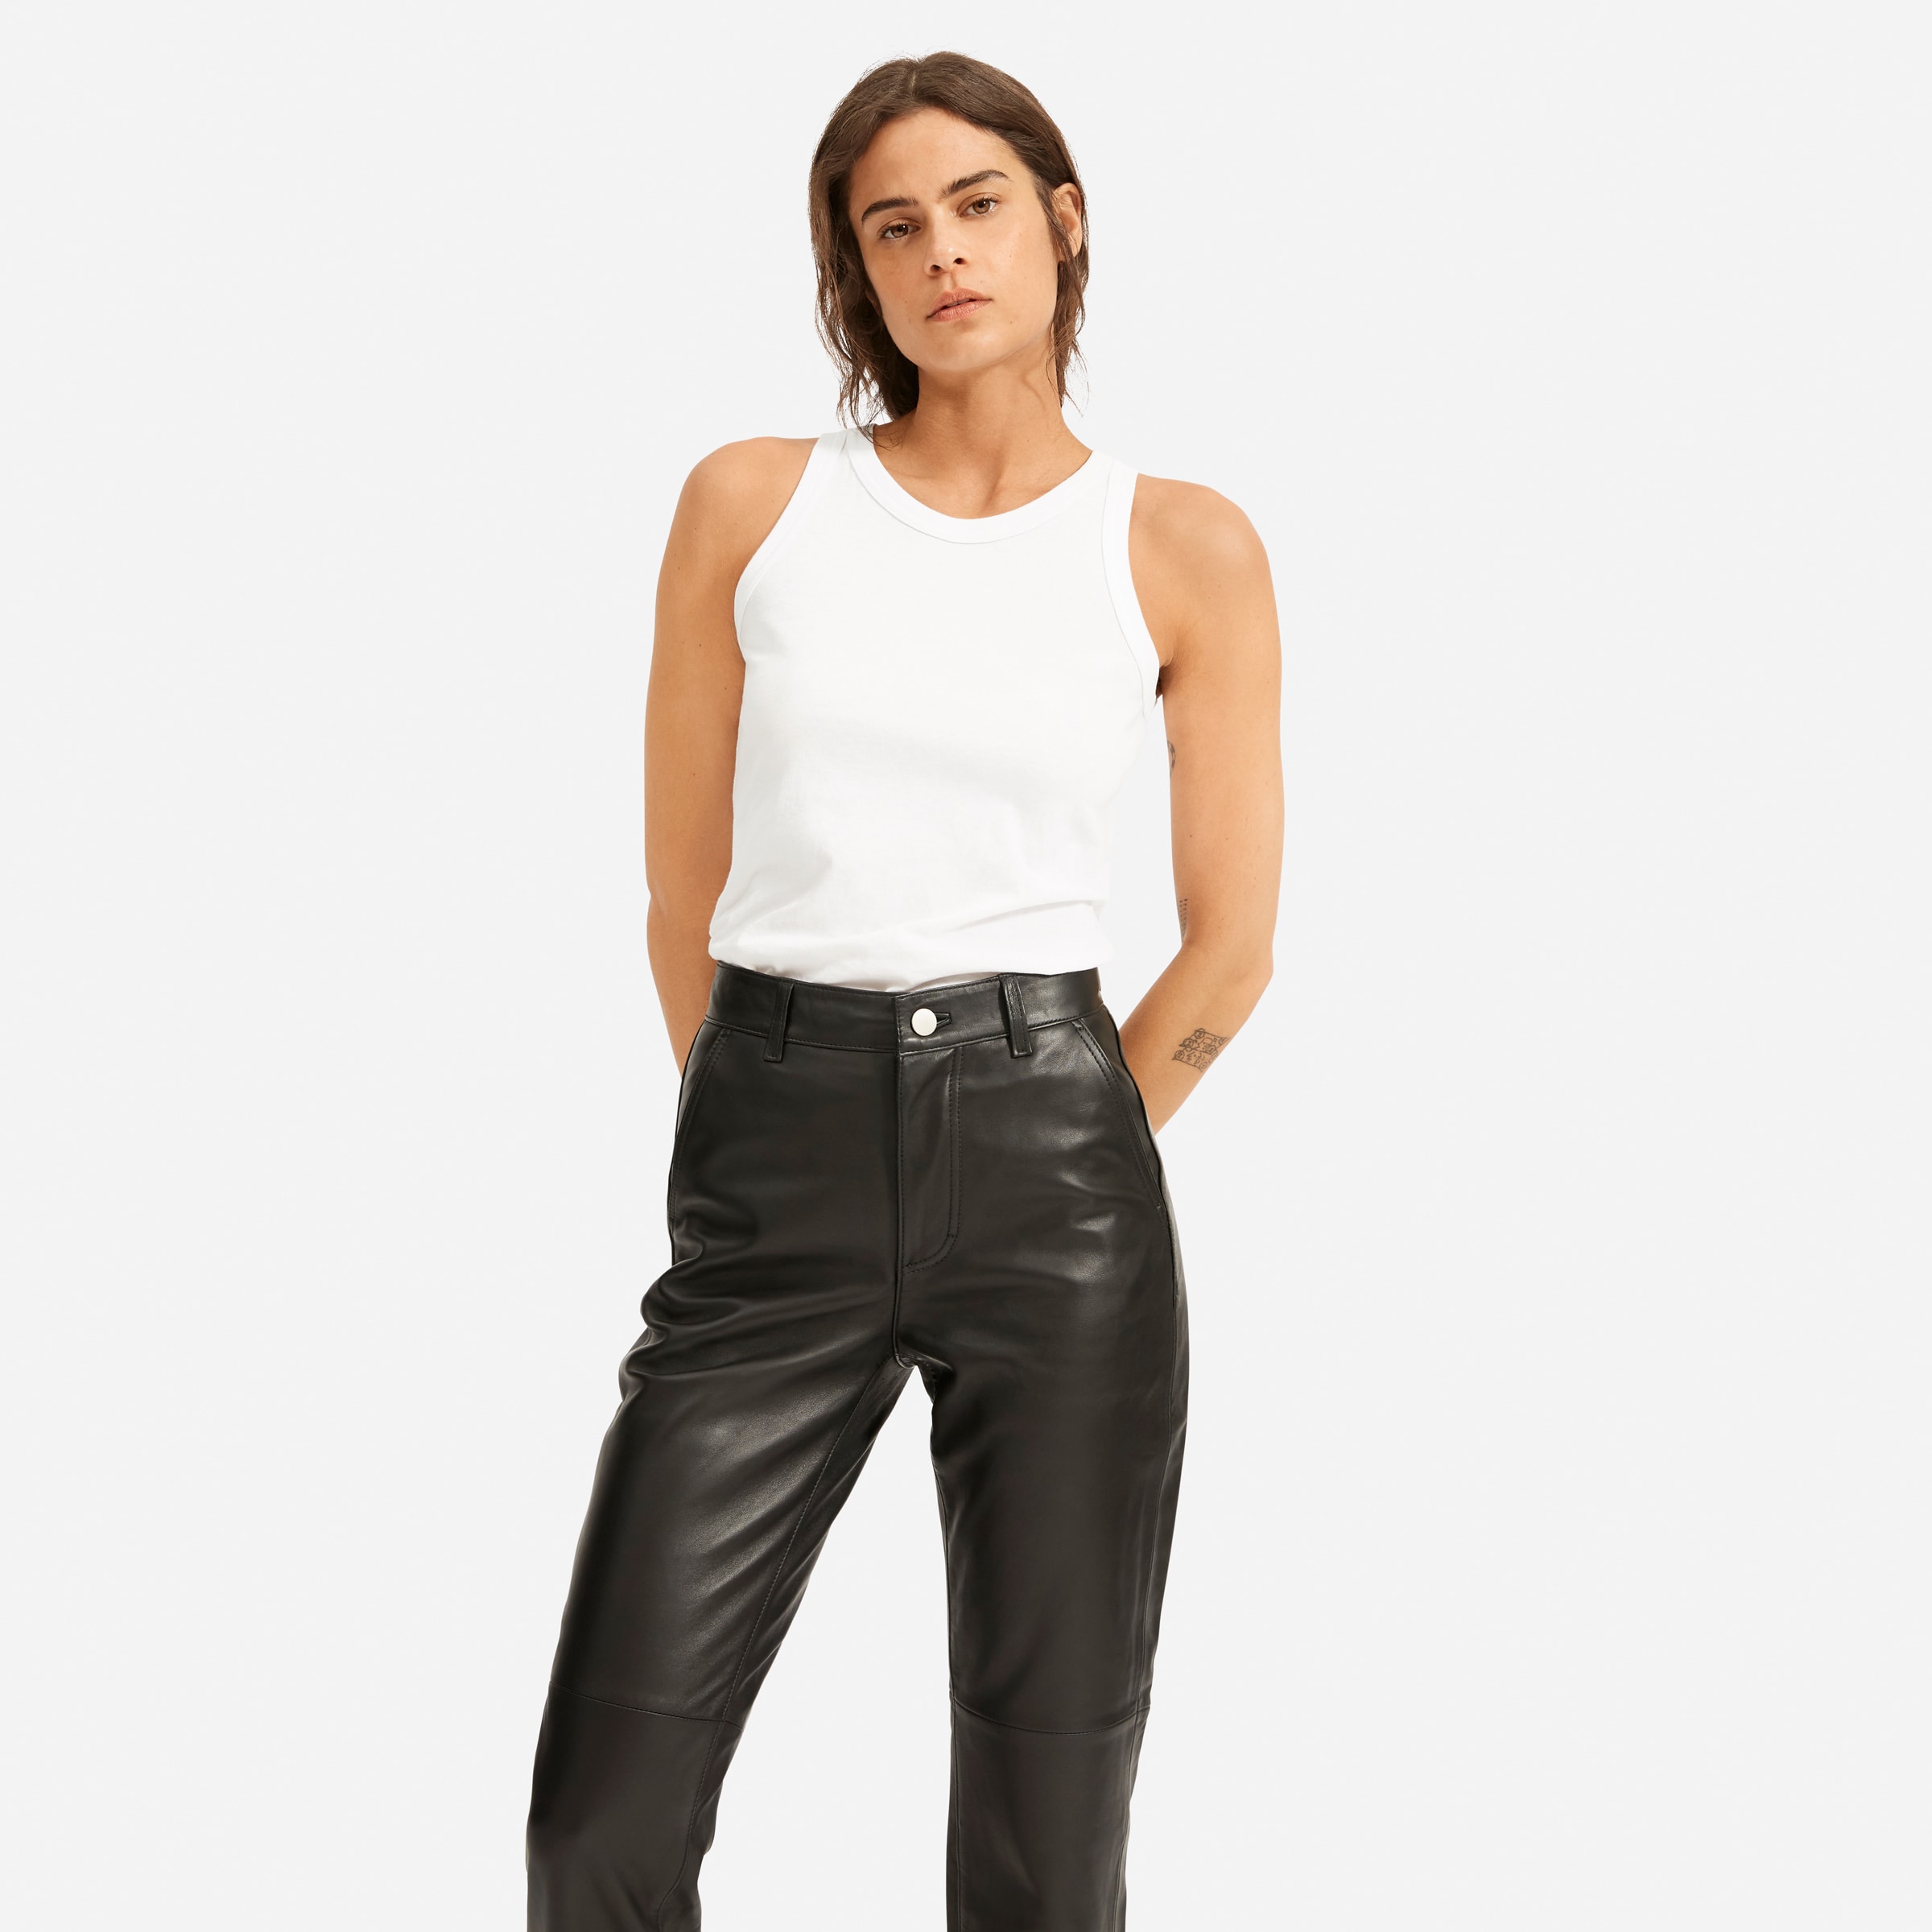 h and m leather pants